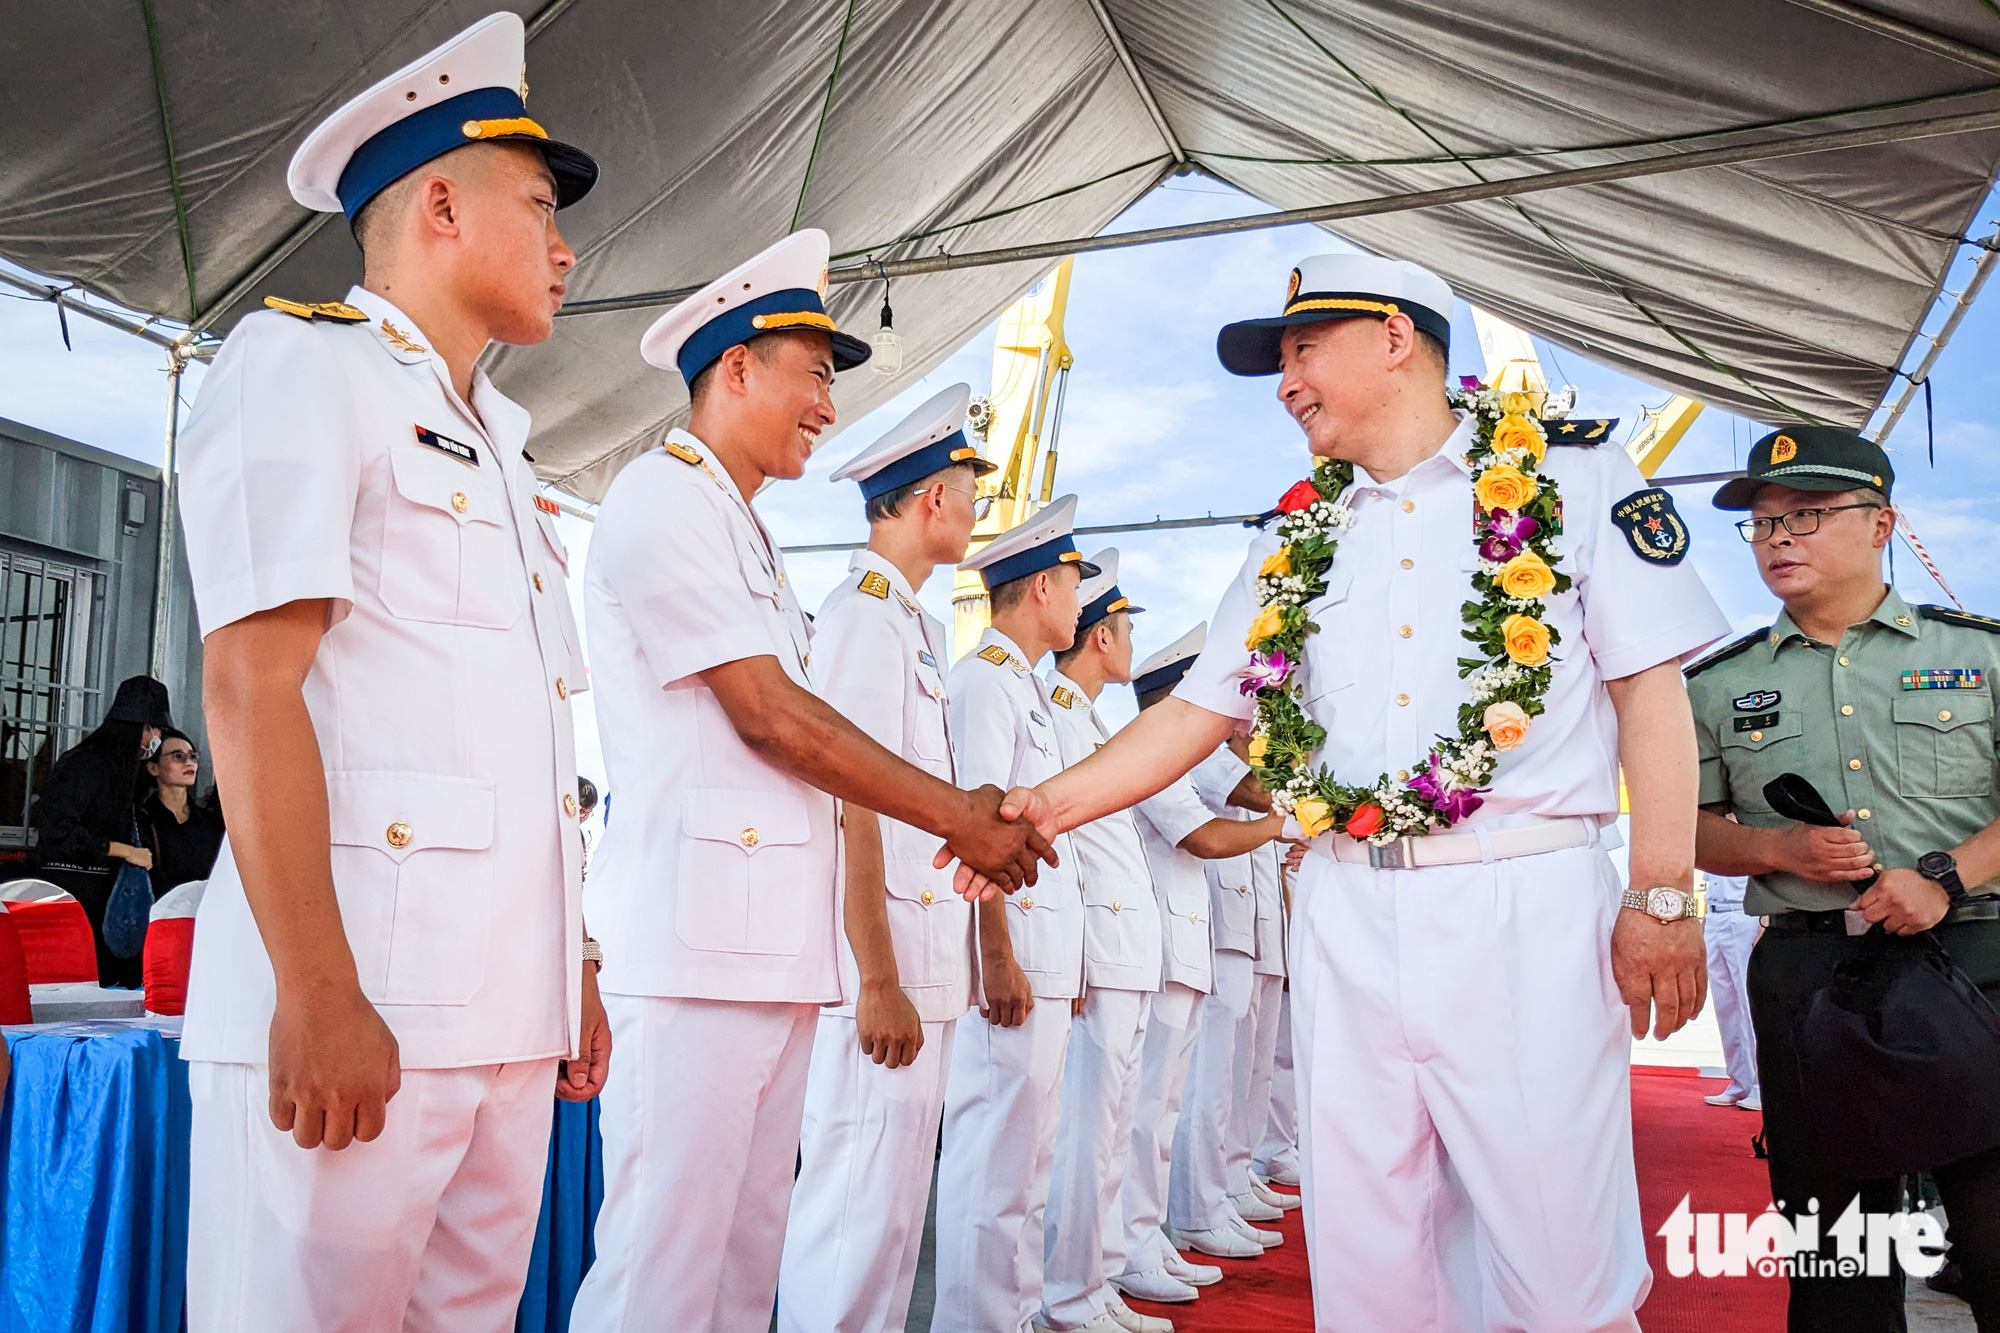 The visit of the Chinese navy delegation to Vietnam’s Da Nang City by the navy training ship Qi Jiguang is led by Major General Su Yinsheng, Political Commissar at the Dalian Naval Academy. Photo: Tan Luc / Tuoi Tre